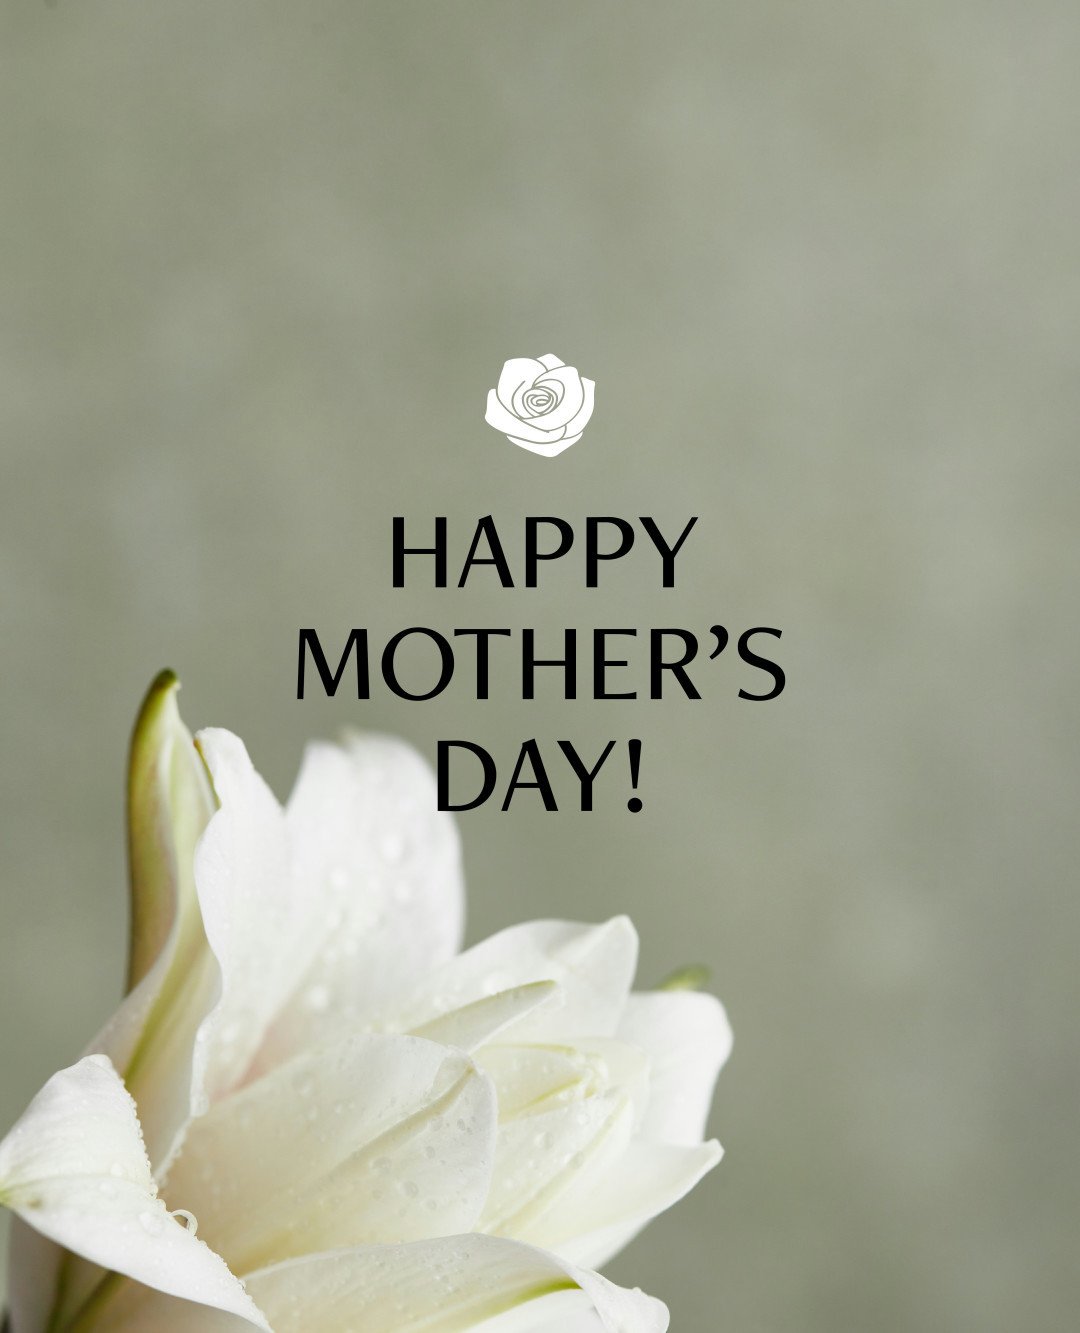 The team at The Sebel Ringwood sends heartfelt wishes to all the mothers and mother figures out there 💐

May your Mother's Day be filled with so much love! 💖